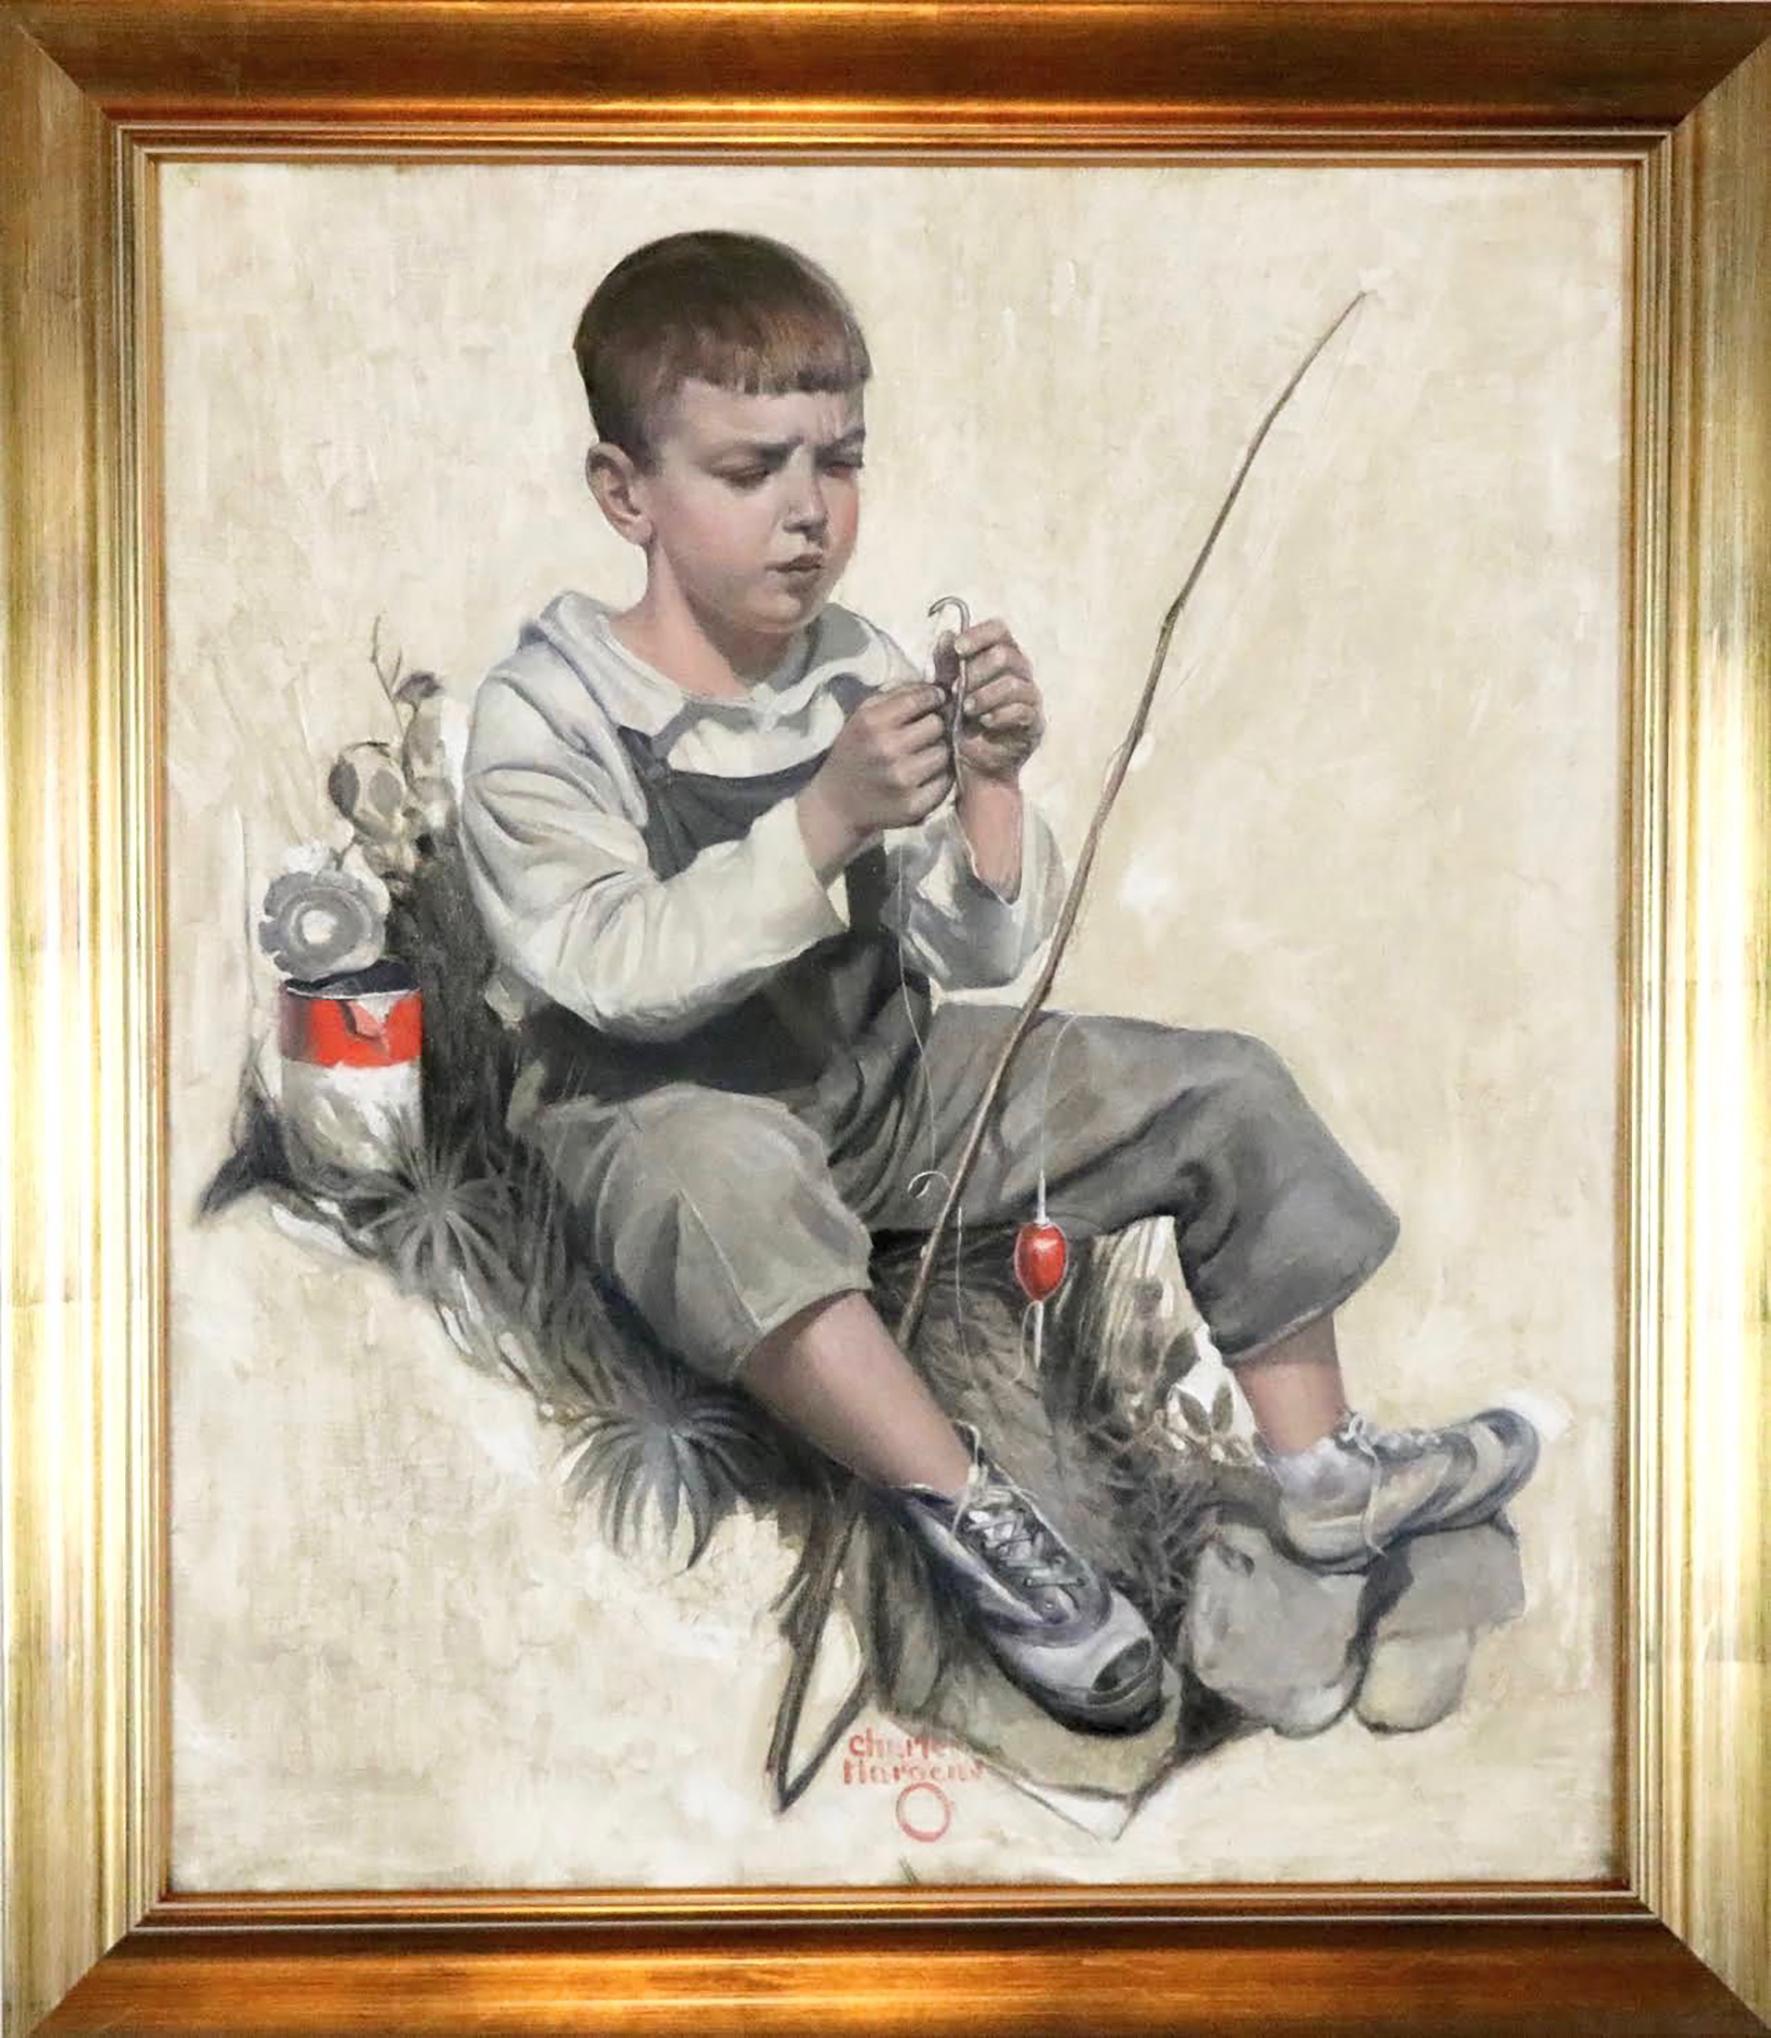 Boy Fishing - Painting by Charles Hargens